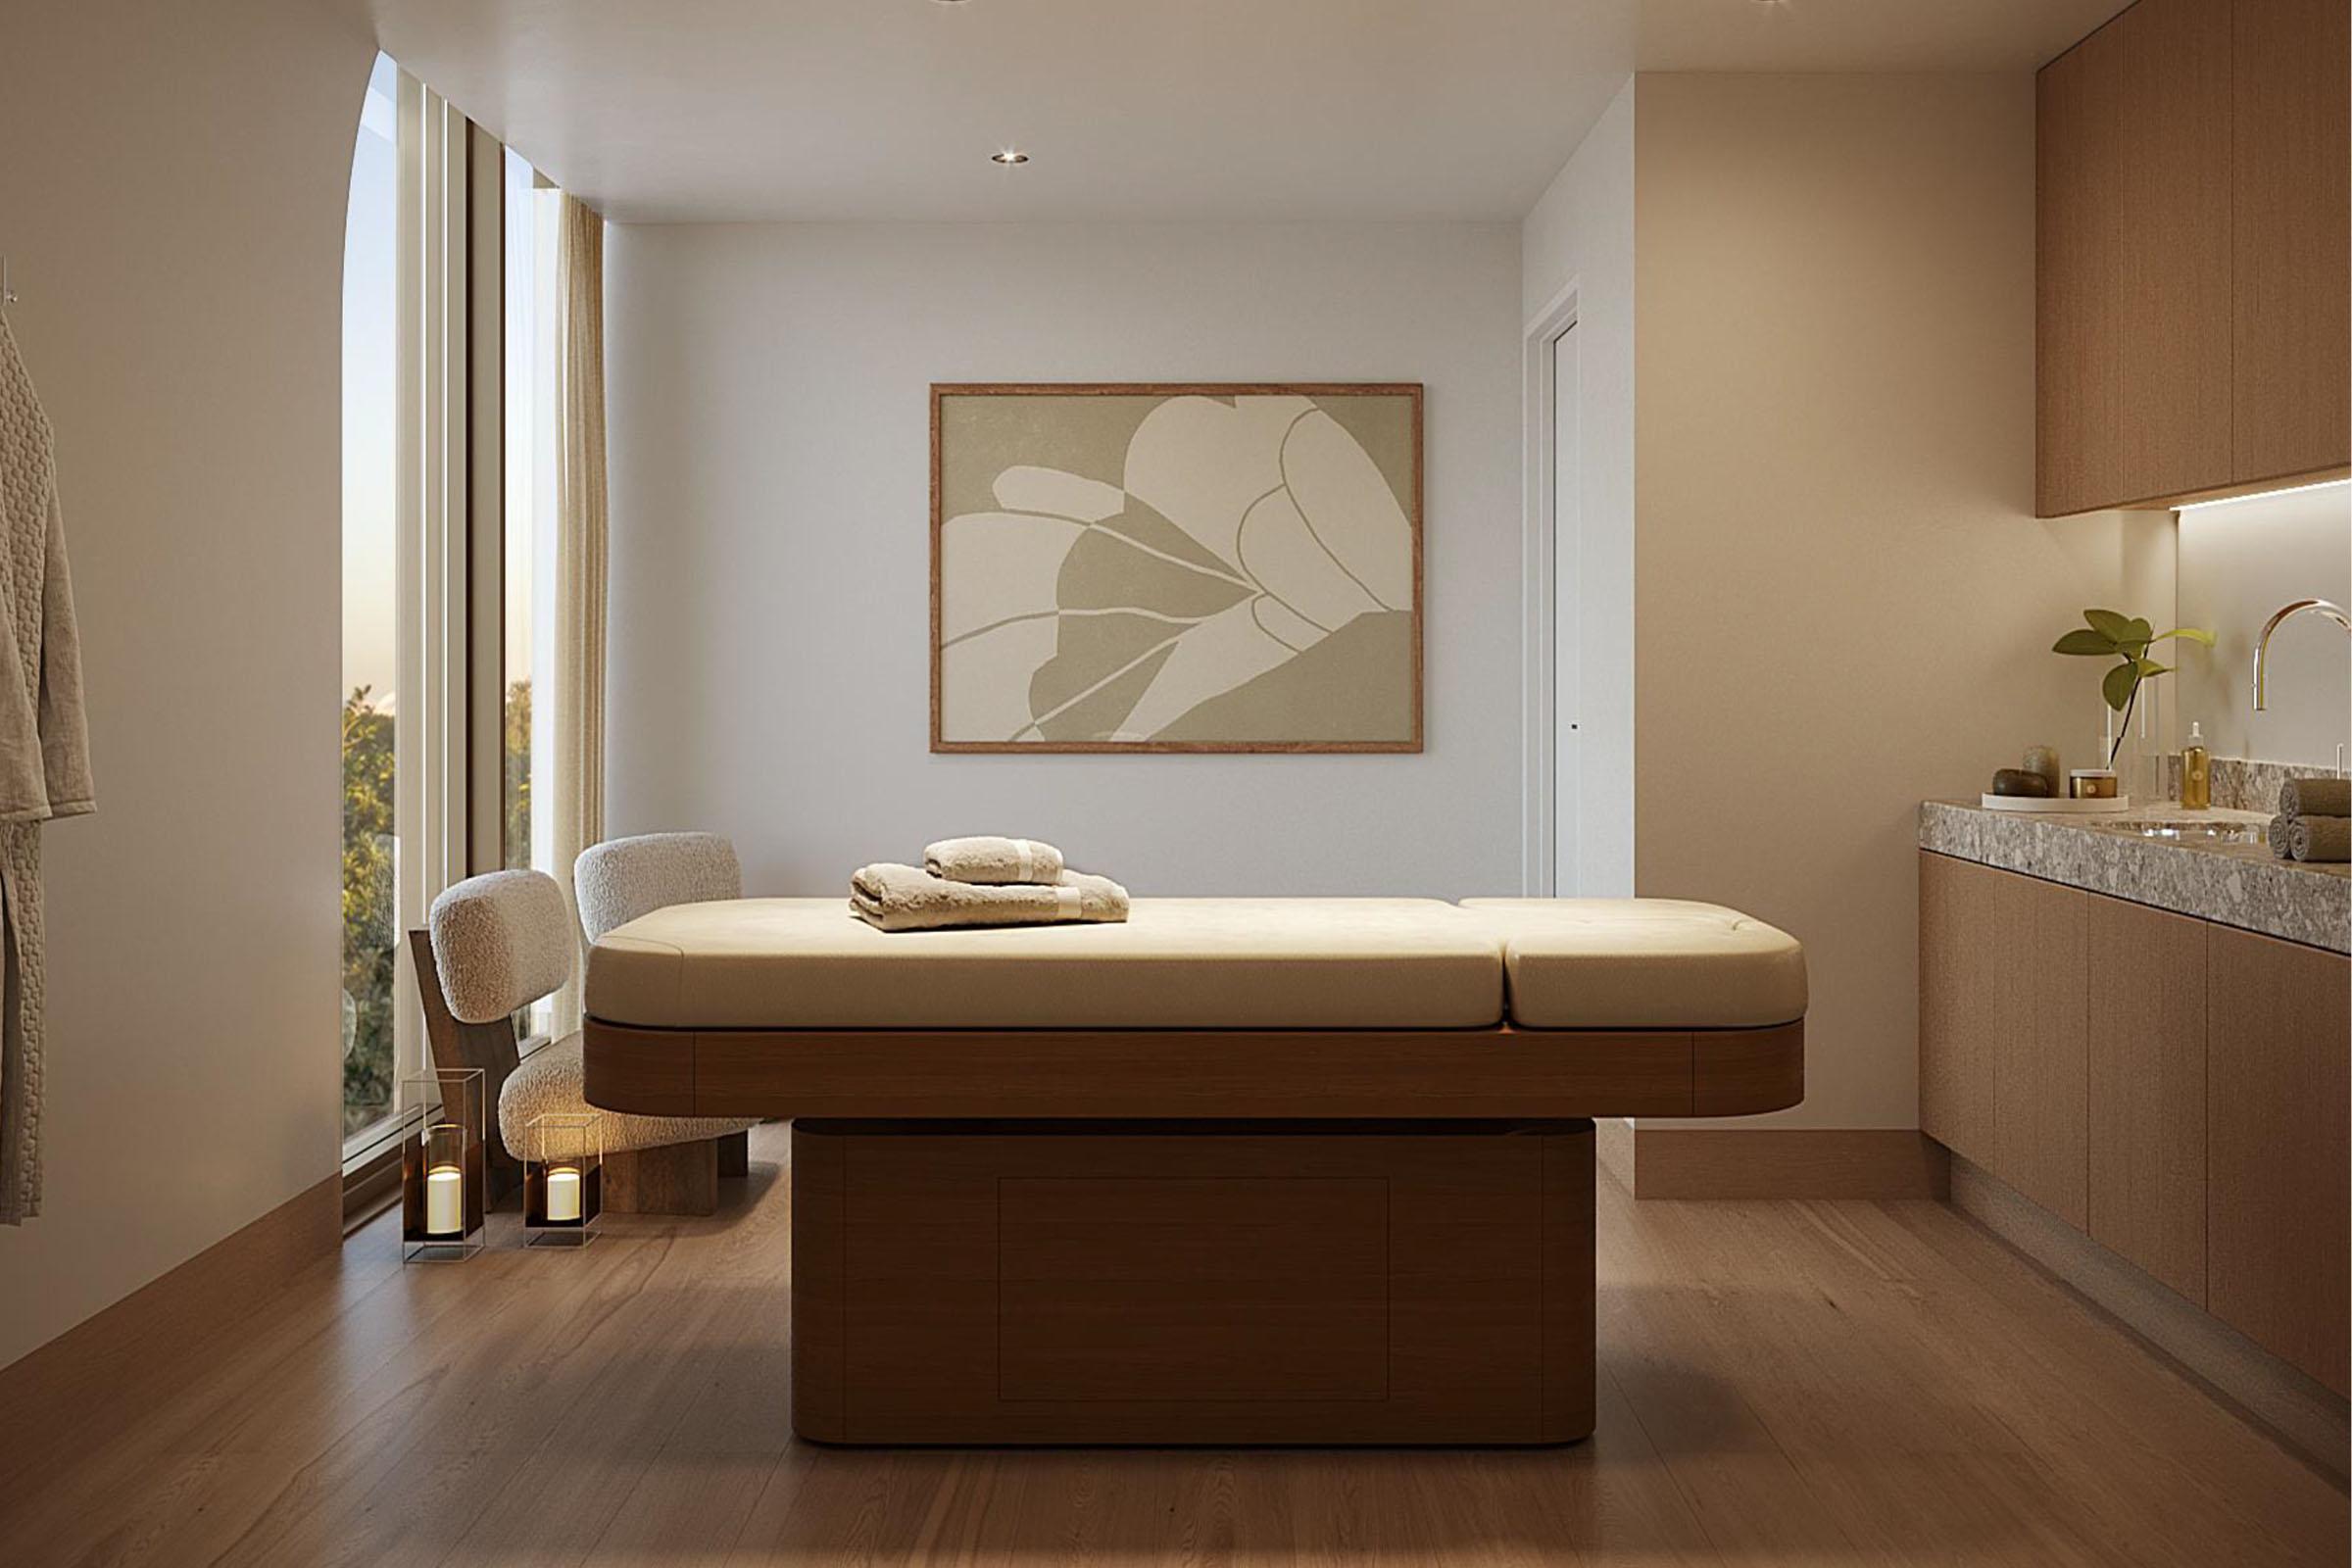 Rendering of Mr. C Tigertail Residences Spa Treatment Room